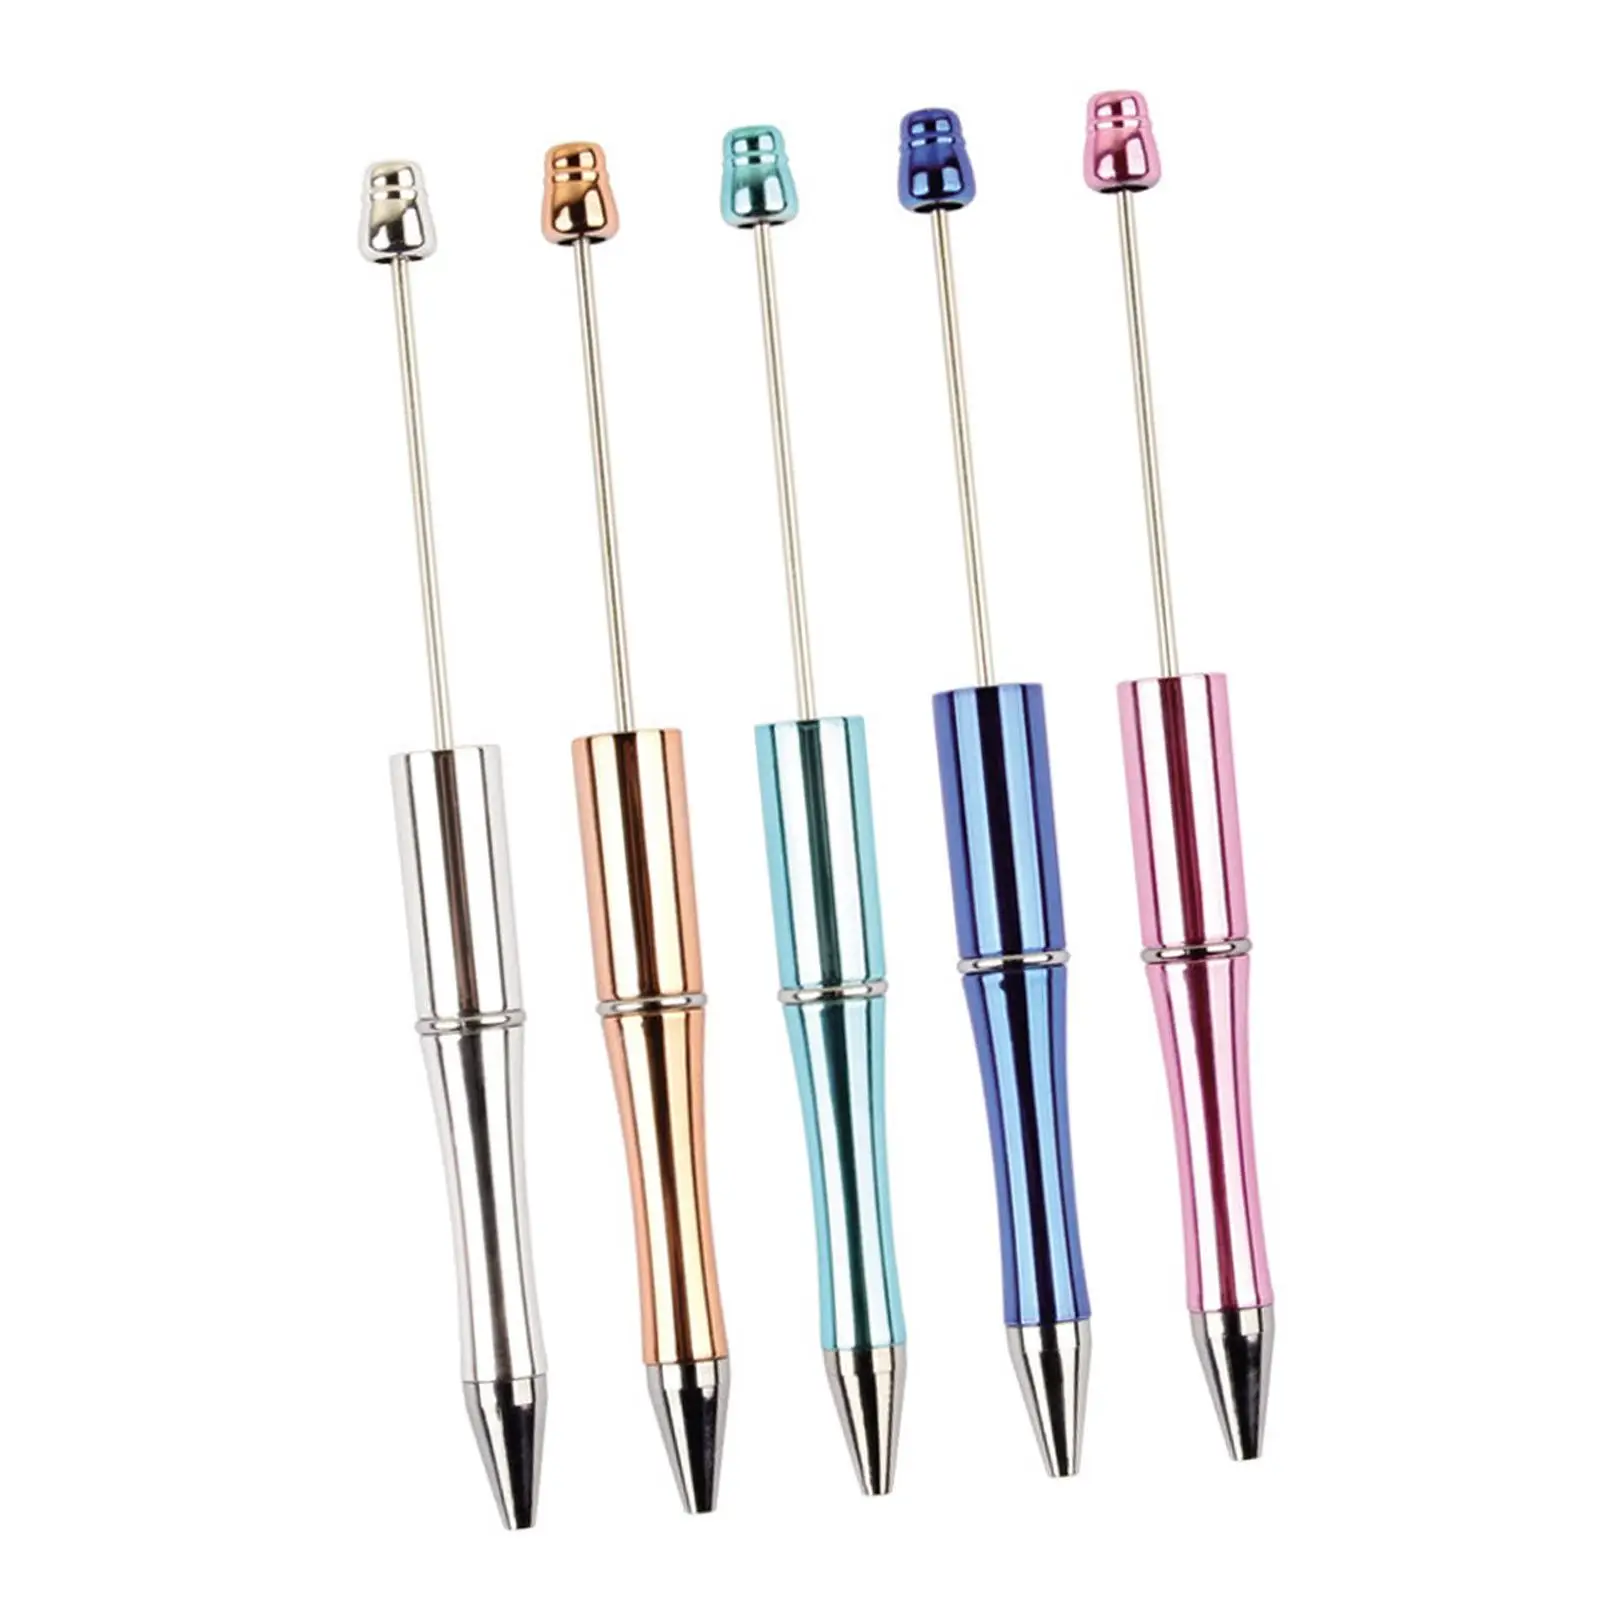 Assorted Bead Pen Bead Pens School Office Writing Supplies Novelty Writing Pen for Stationery Exam Spare Office Drawing Supplies